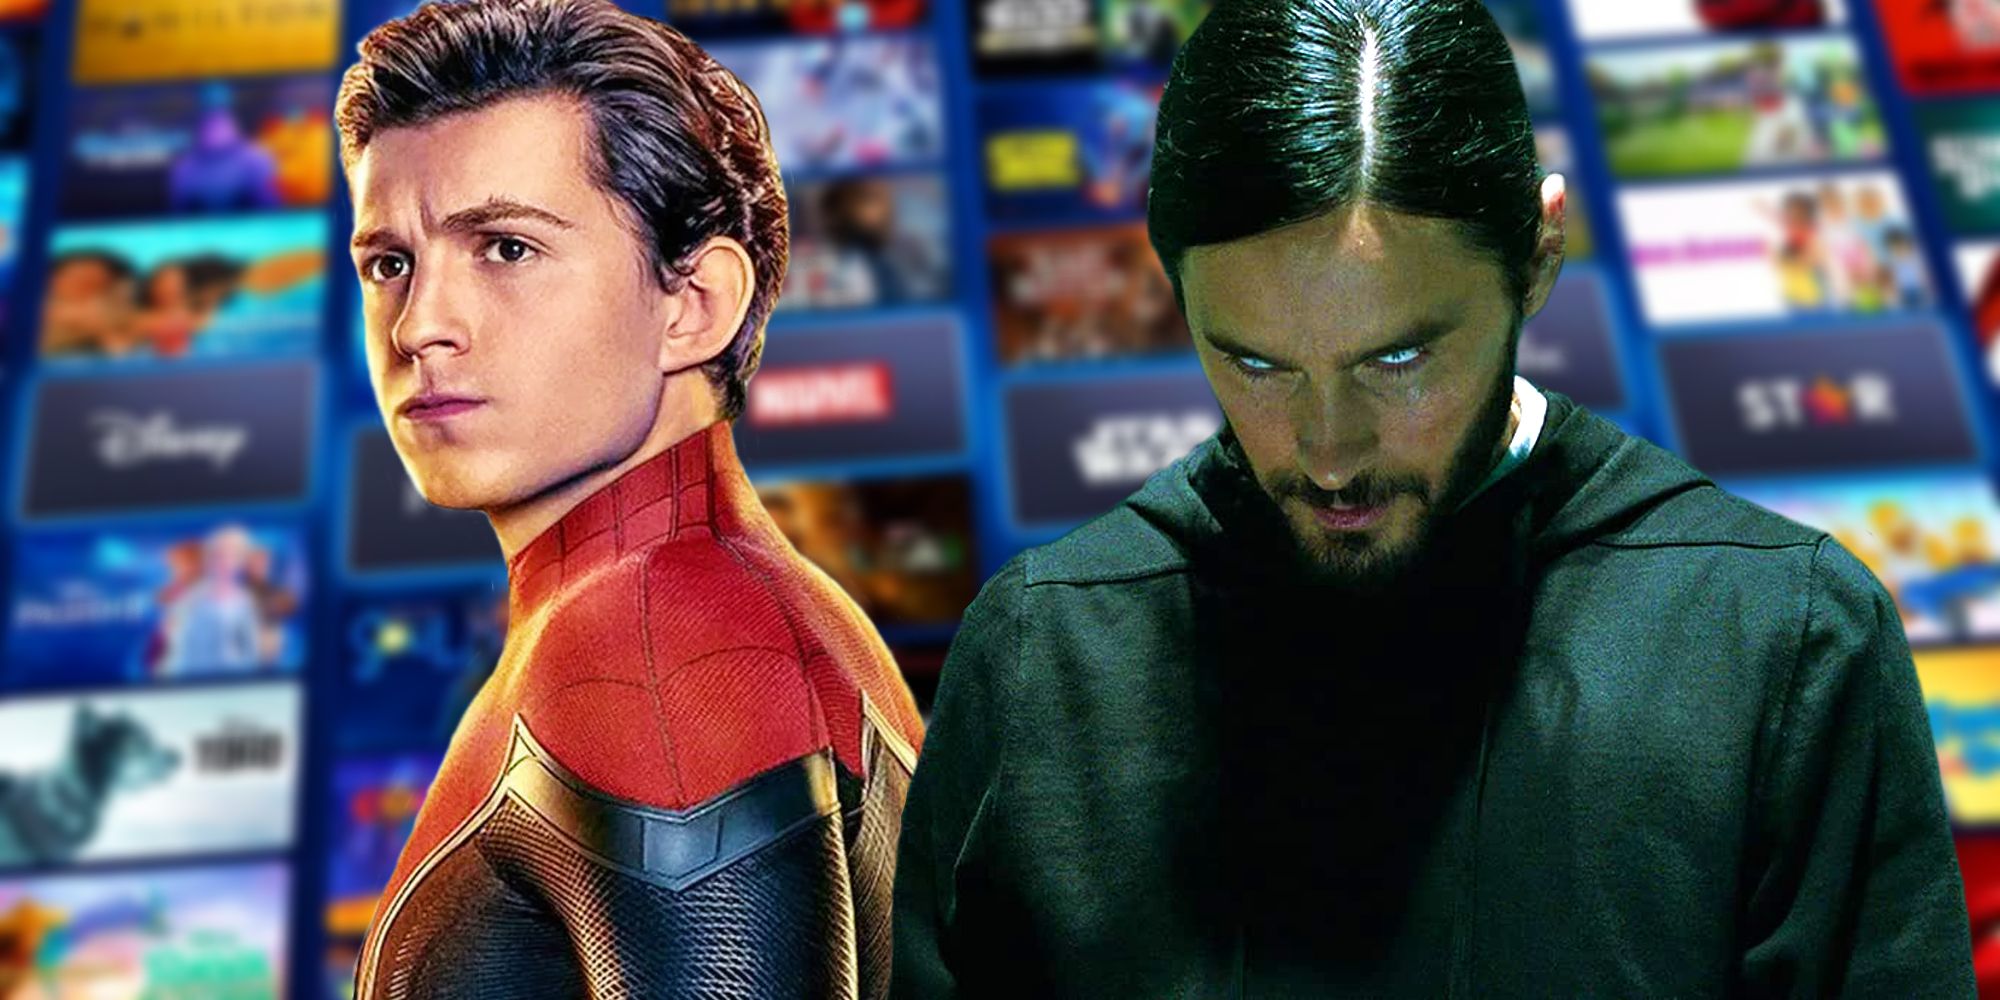 Jared Leto as Morbius and Tom Holland as Spider-Man above a blurred image of Disney+'s library